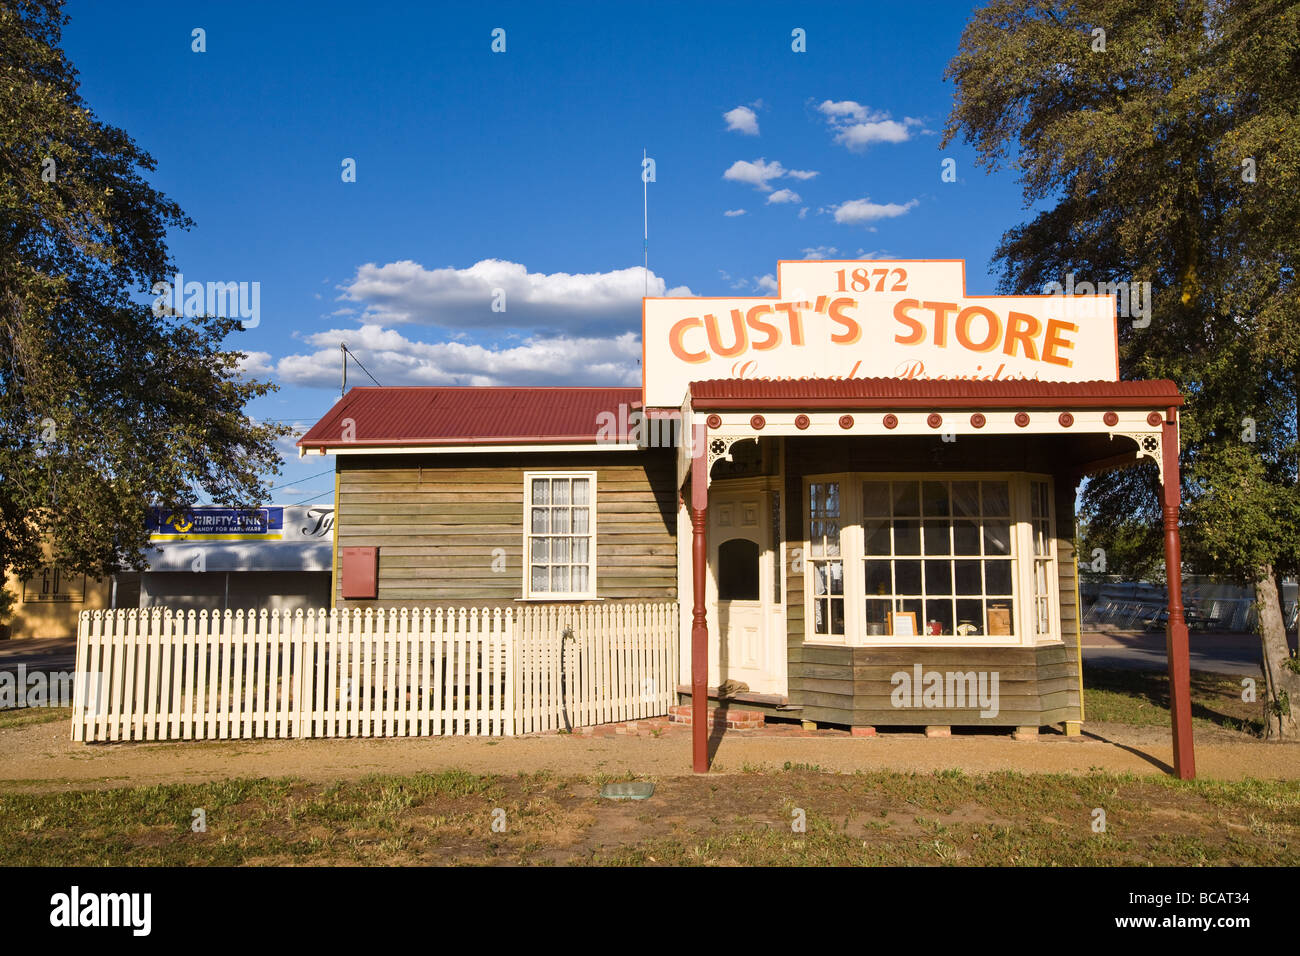 Cust's Store, historic reconstruction in the main street of small rural town of Rupanyup, Victoria, Australia. Stock Photo